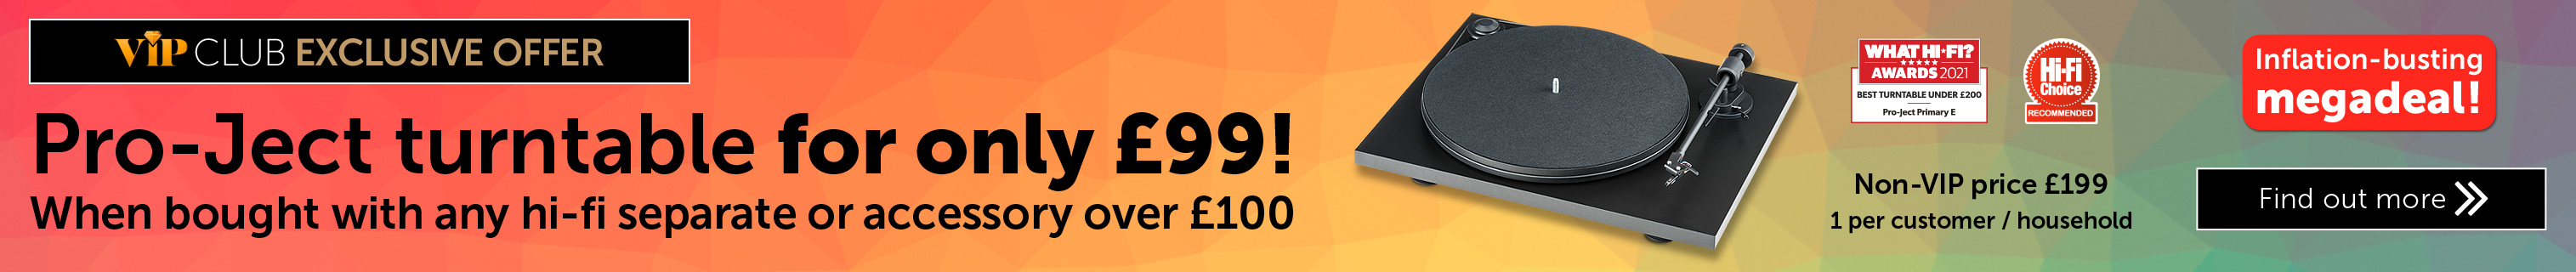 Pro-Ject turntable for only £99